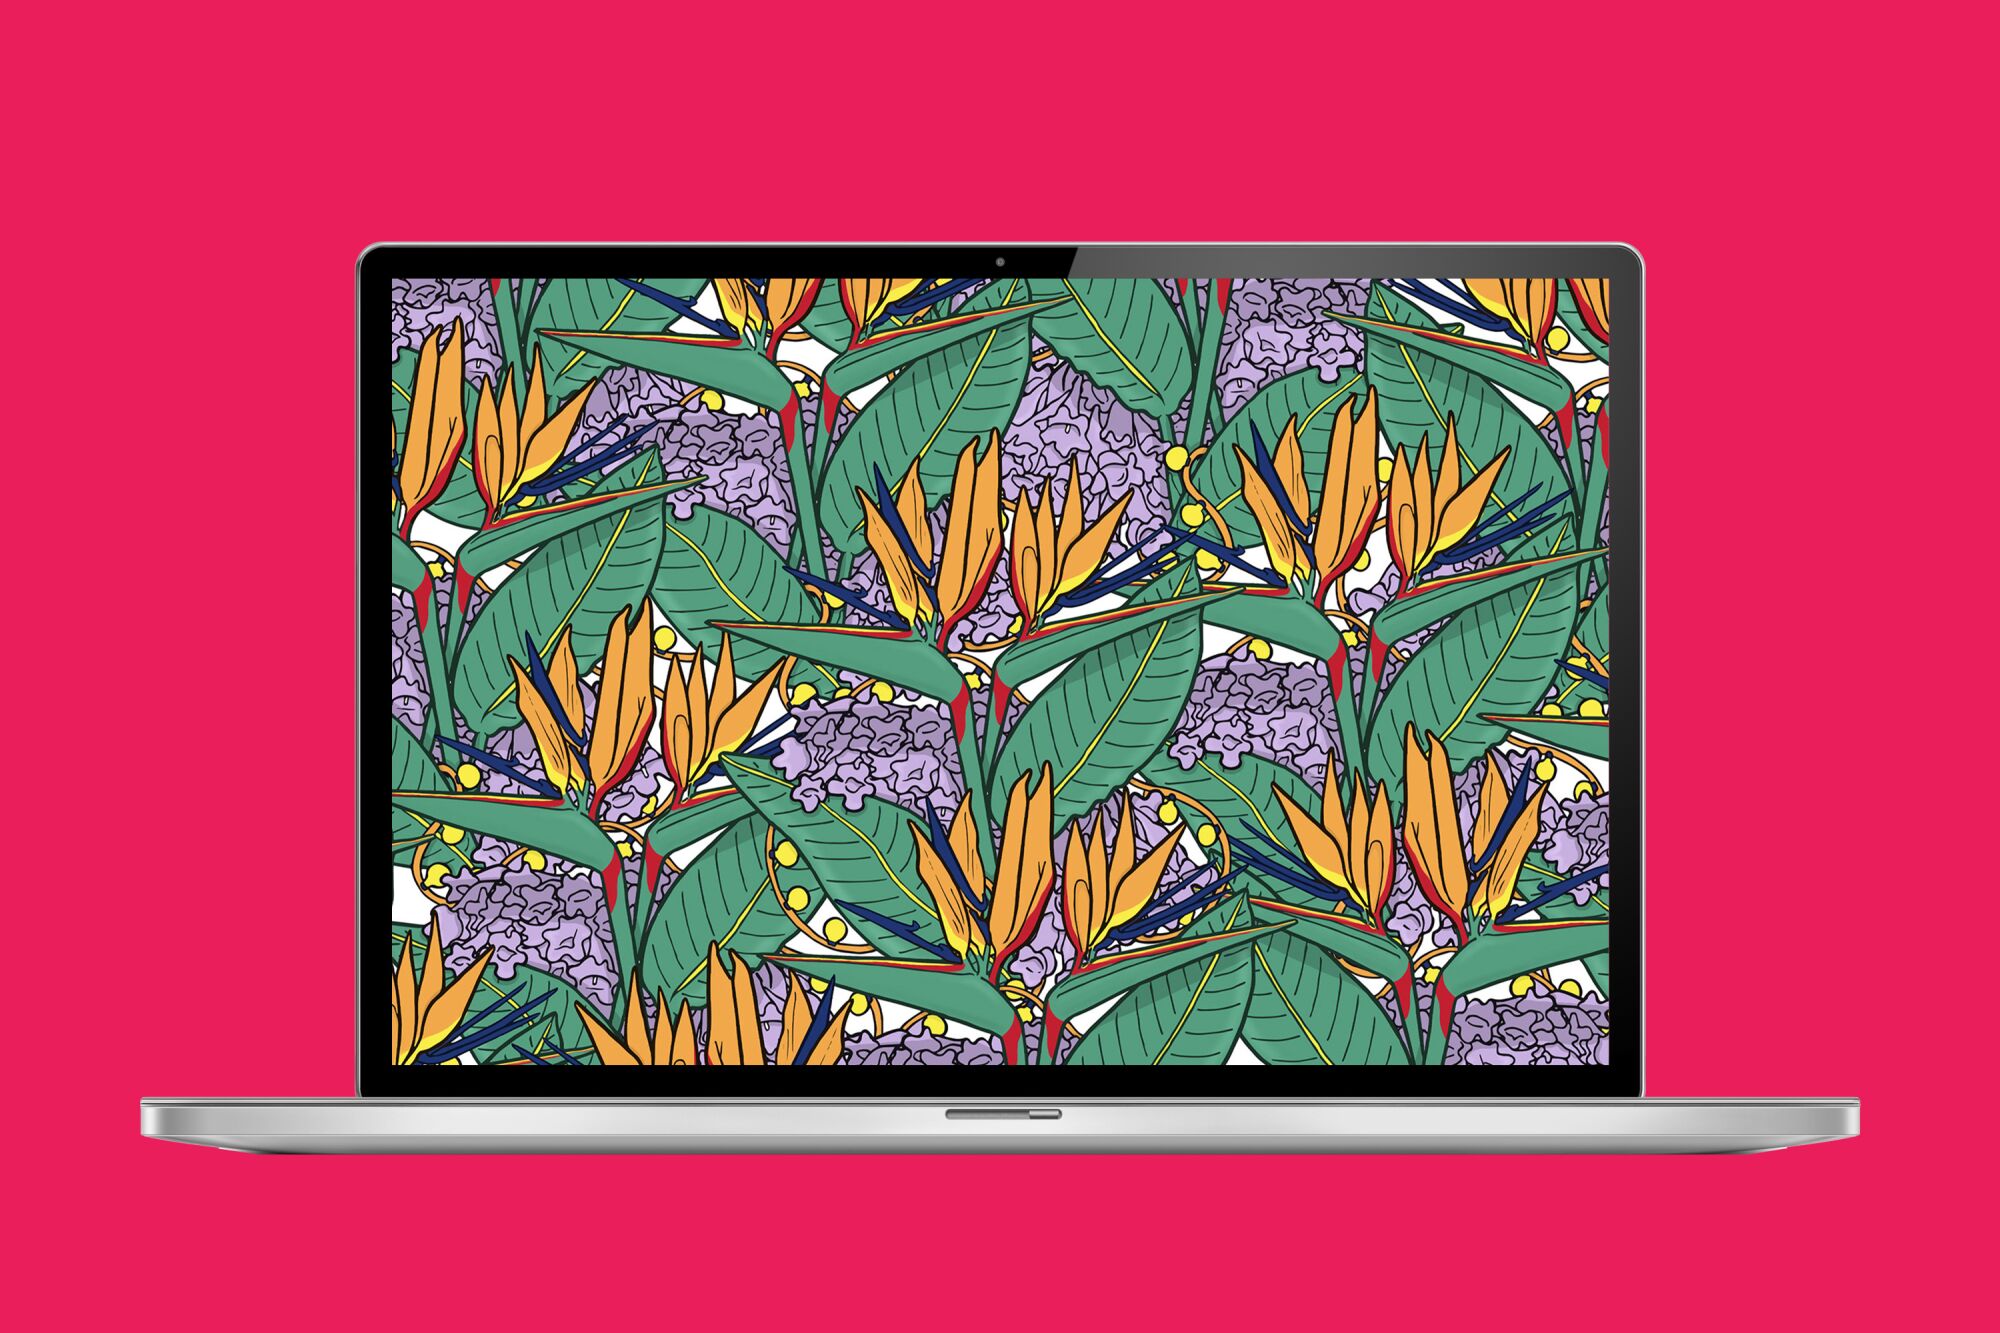 Mockup of a Zoom background with a birds of paradise illustration.